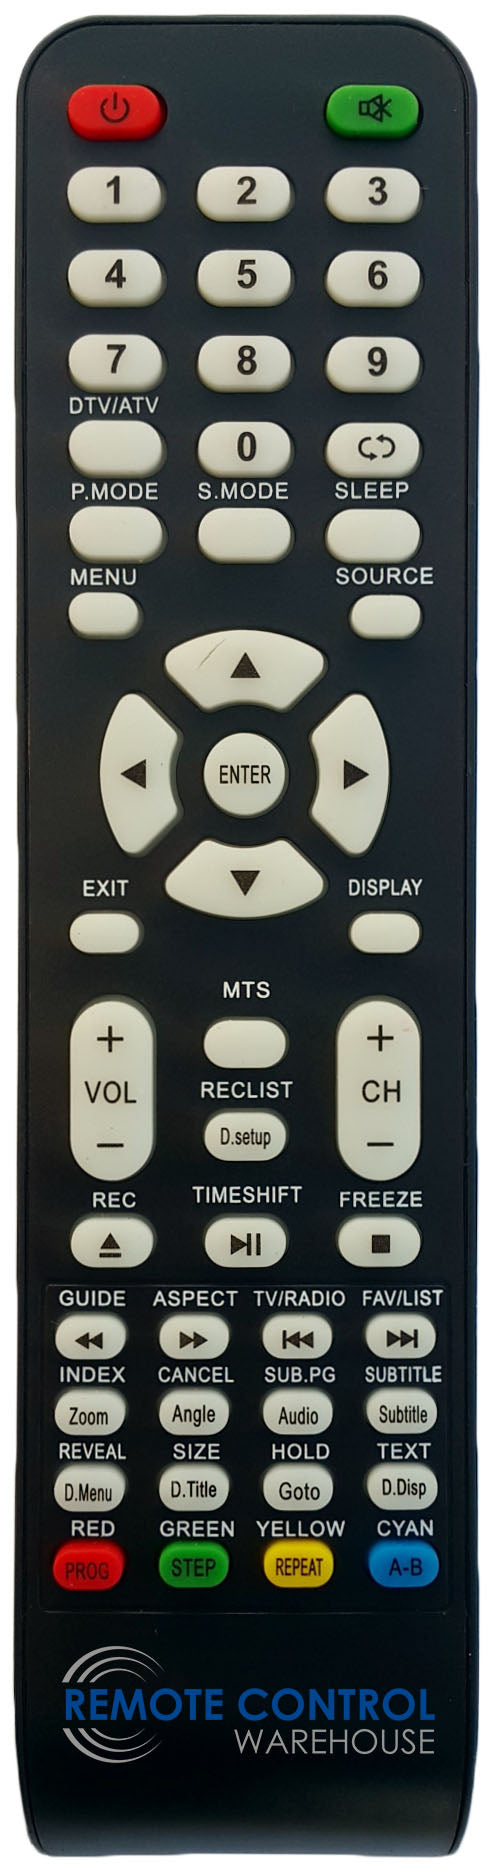 REPLACEMENT CONIA REMOTE CONTROL - CE2202FHDVDR  LED (blacklight) TV - Remote Control Warehouse